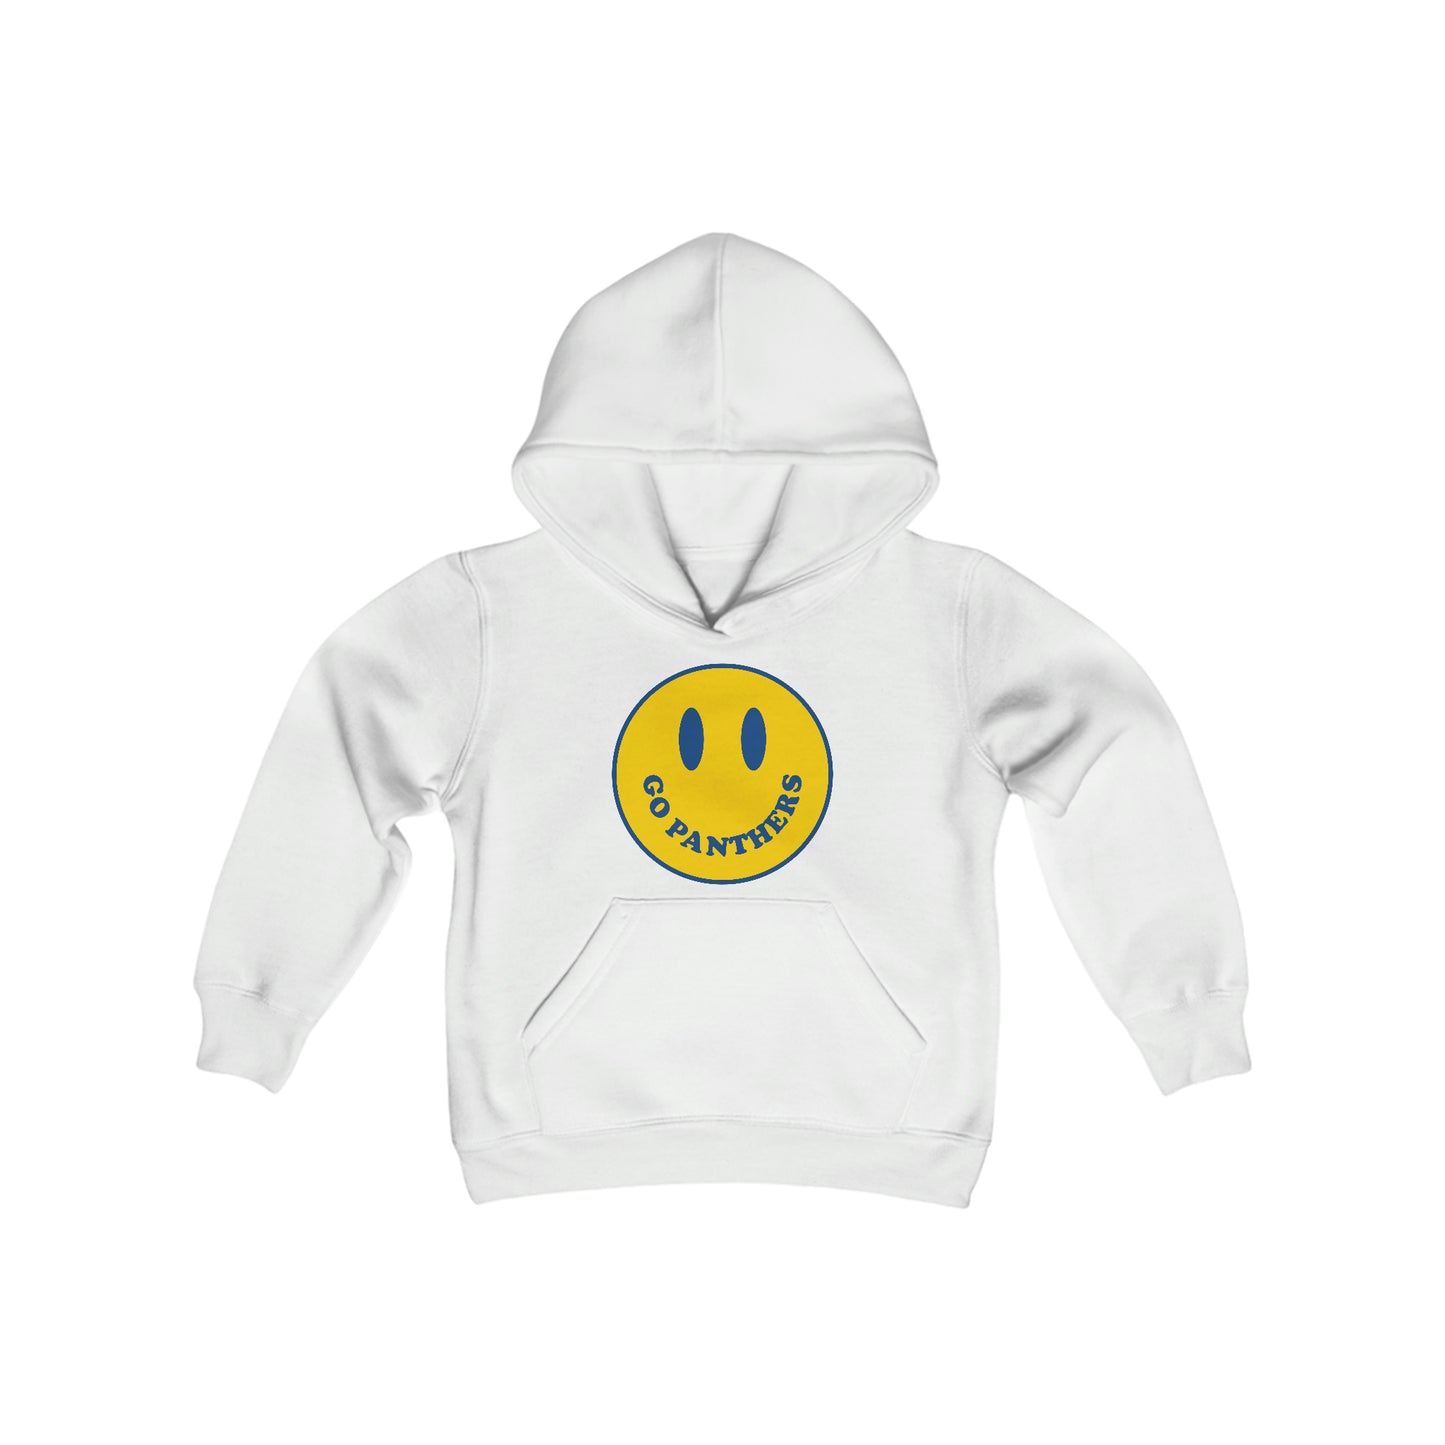 Go Panthers Smiley Youth Hoodie